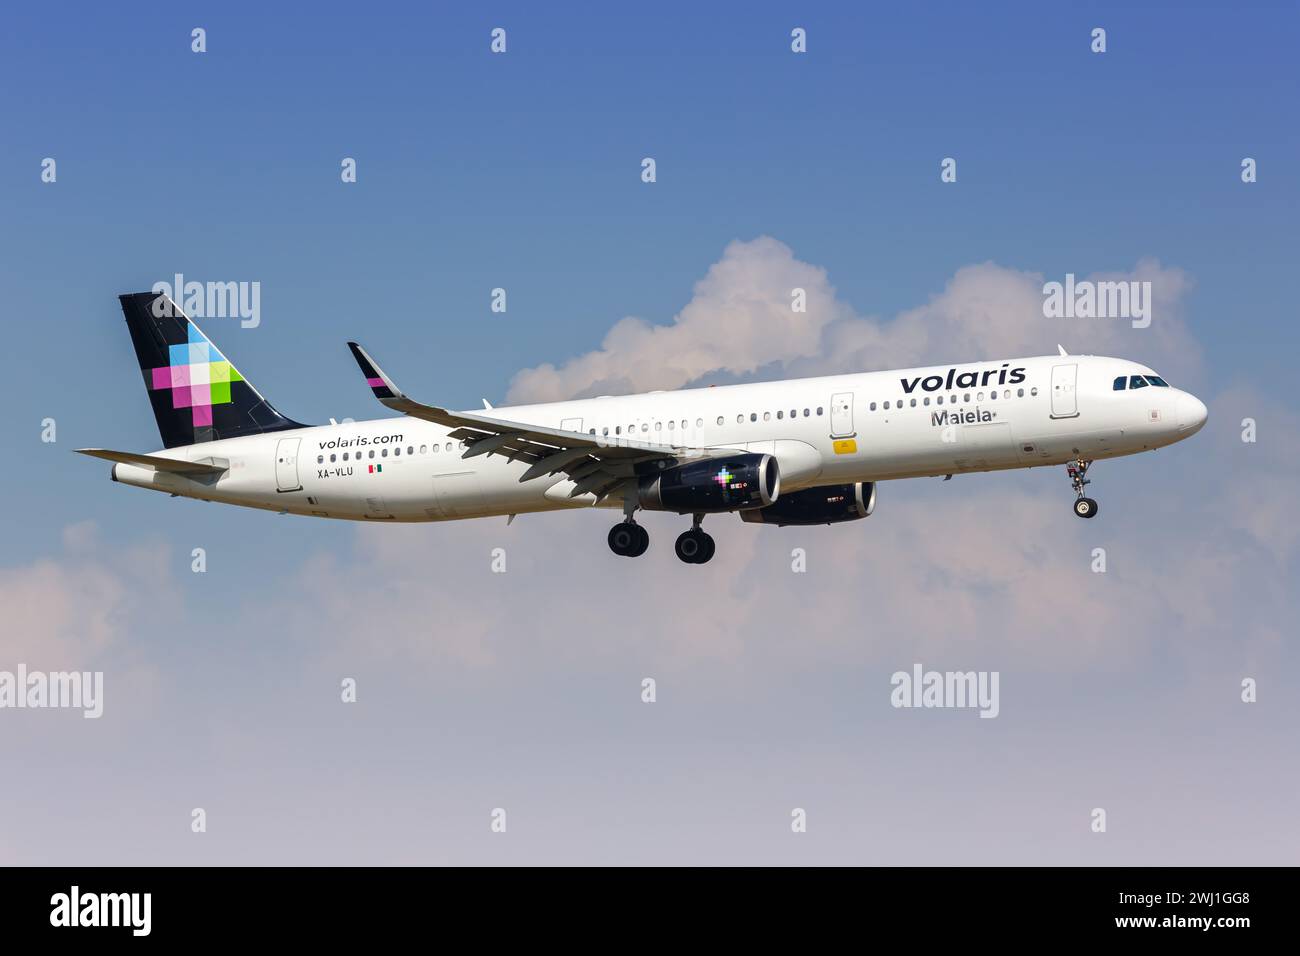 Volaris Airbus A321 aircraft Dallas Fort Worth Airport in the USA Stock Photo